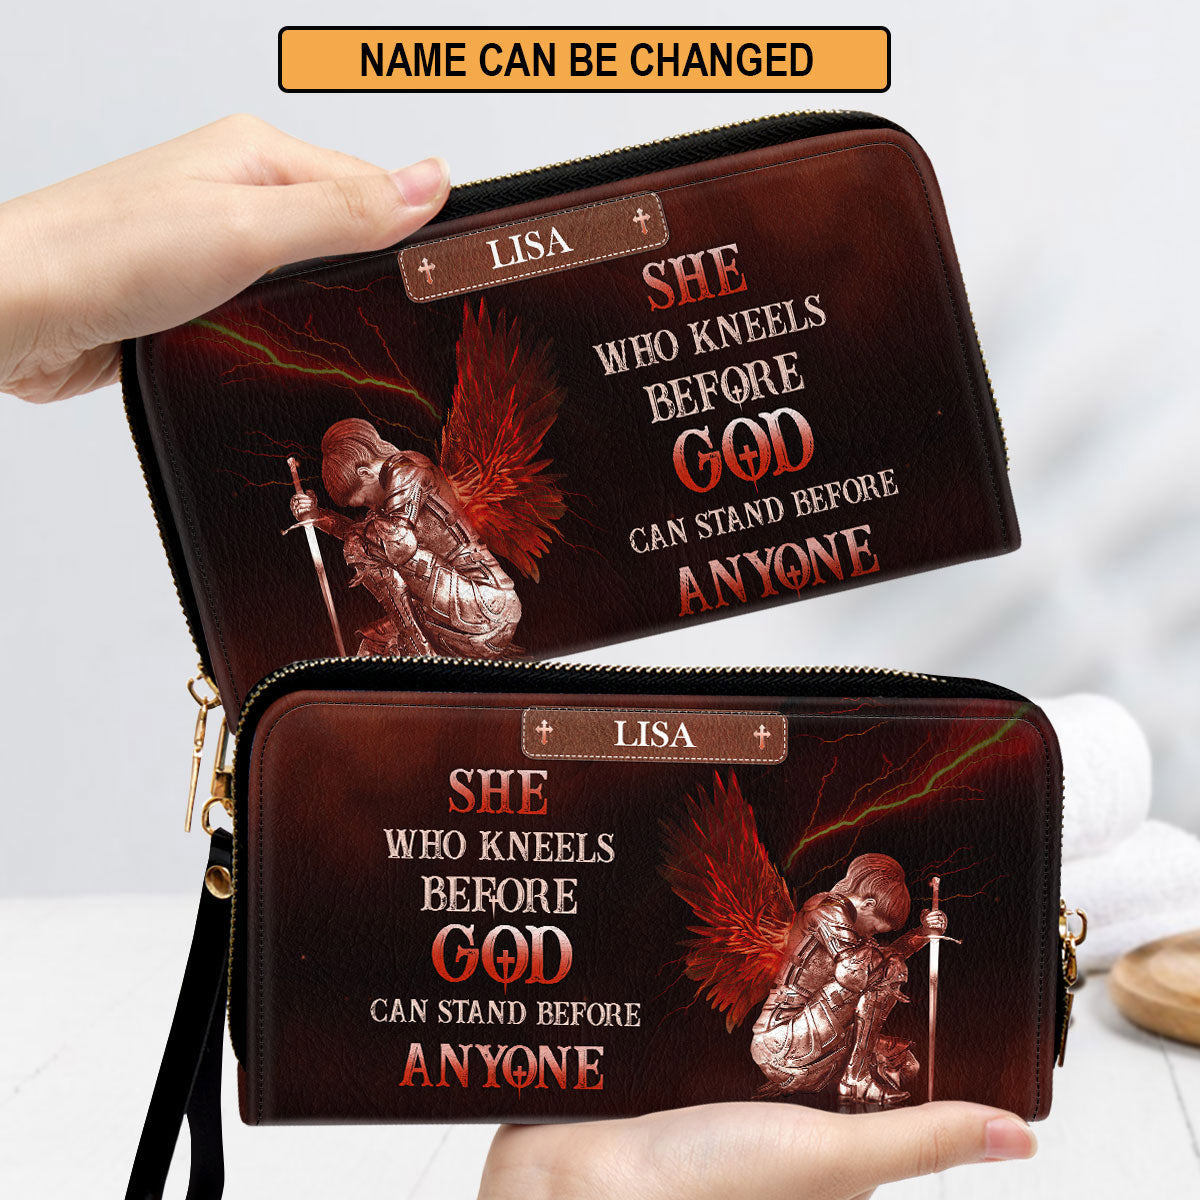 Who Kneels Before God Can Stand Before Anyone Clutch Purse For Women - Personalized Name - Christian Gifts For Women